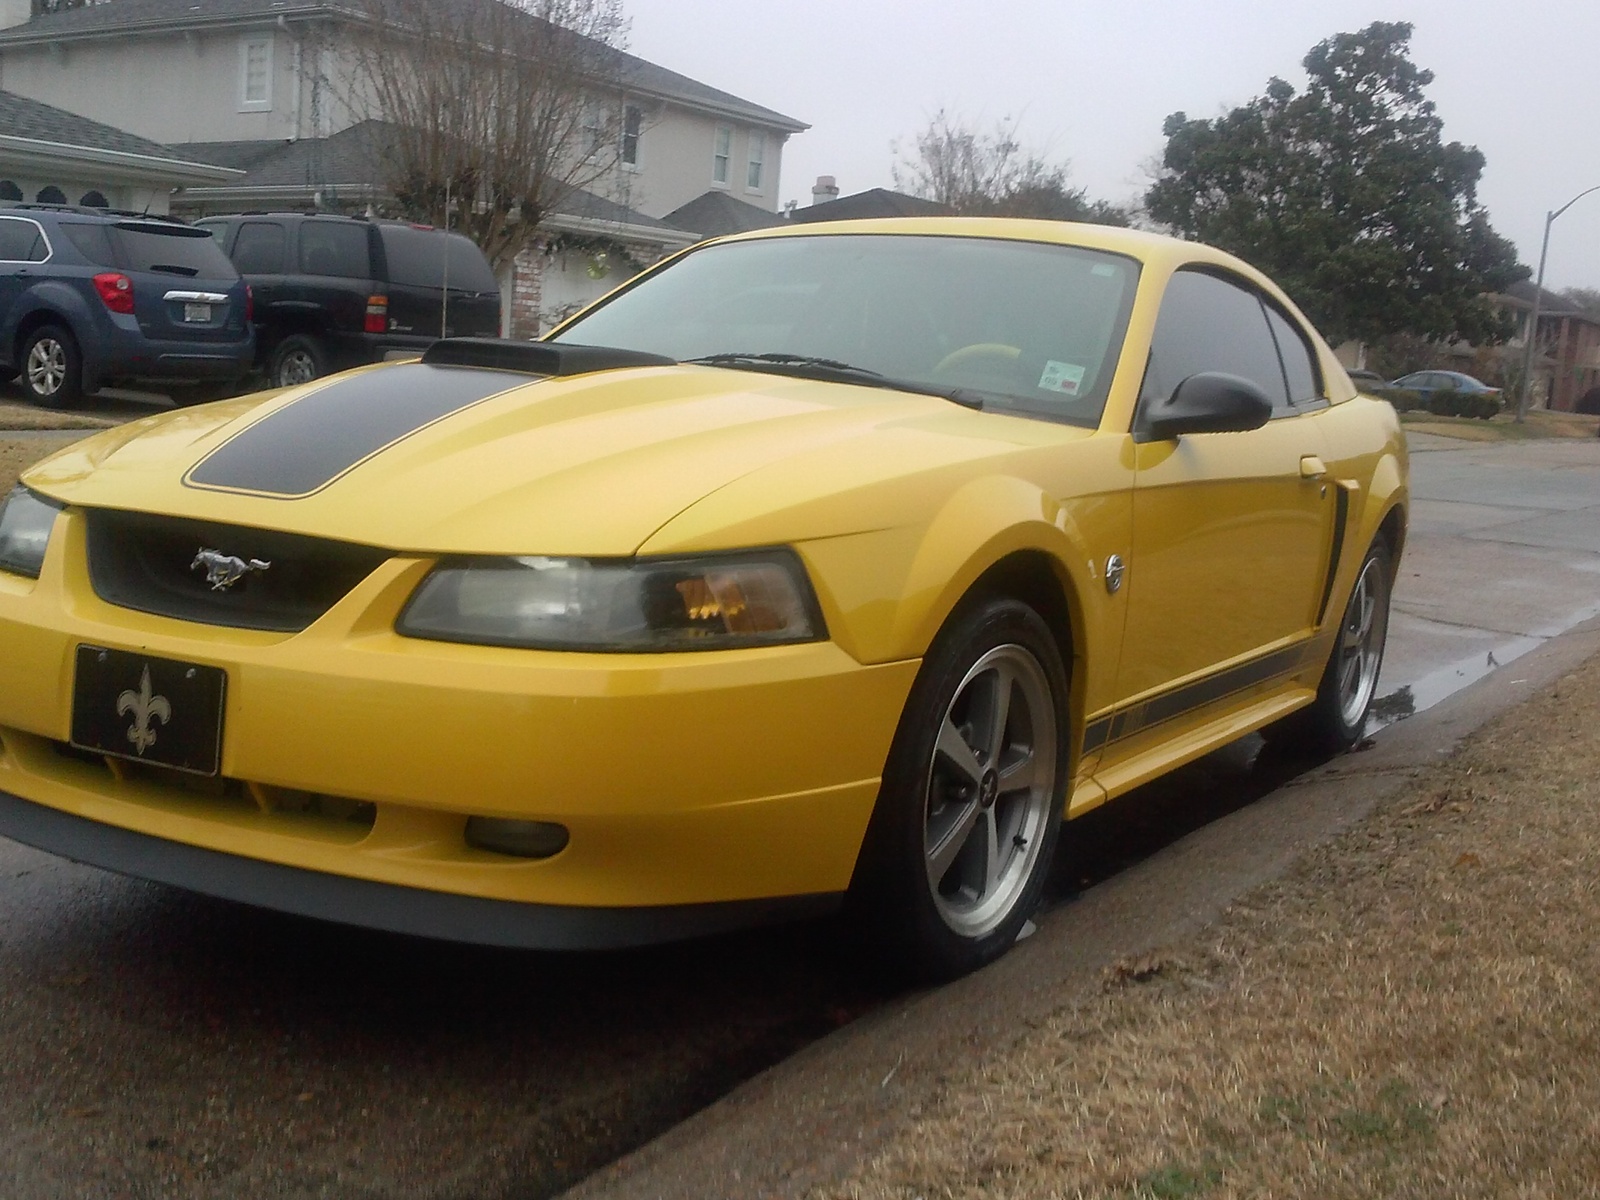 2004 Ford mach 1 mustang specs #3